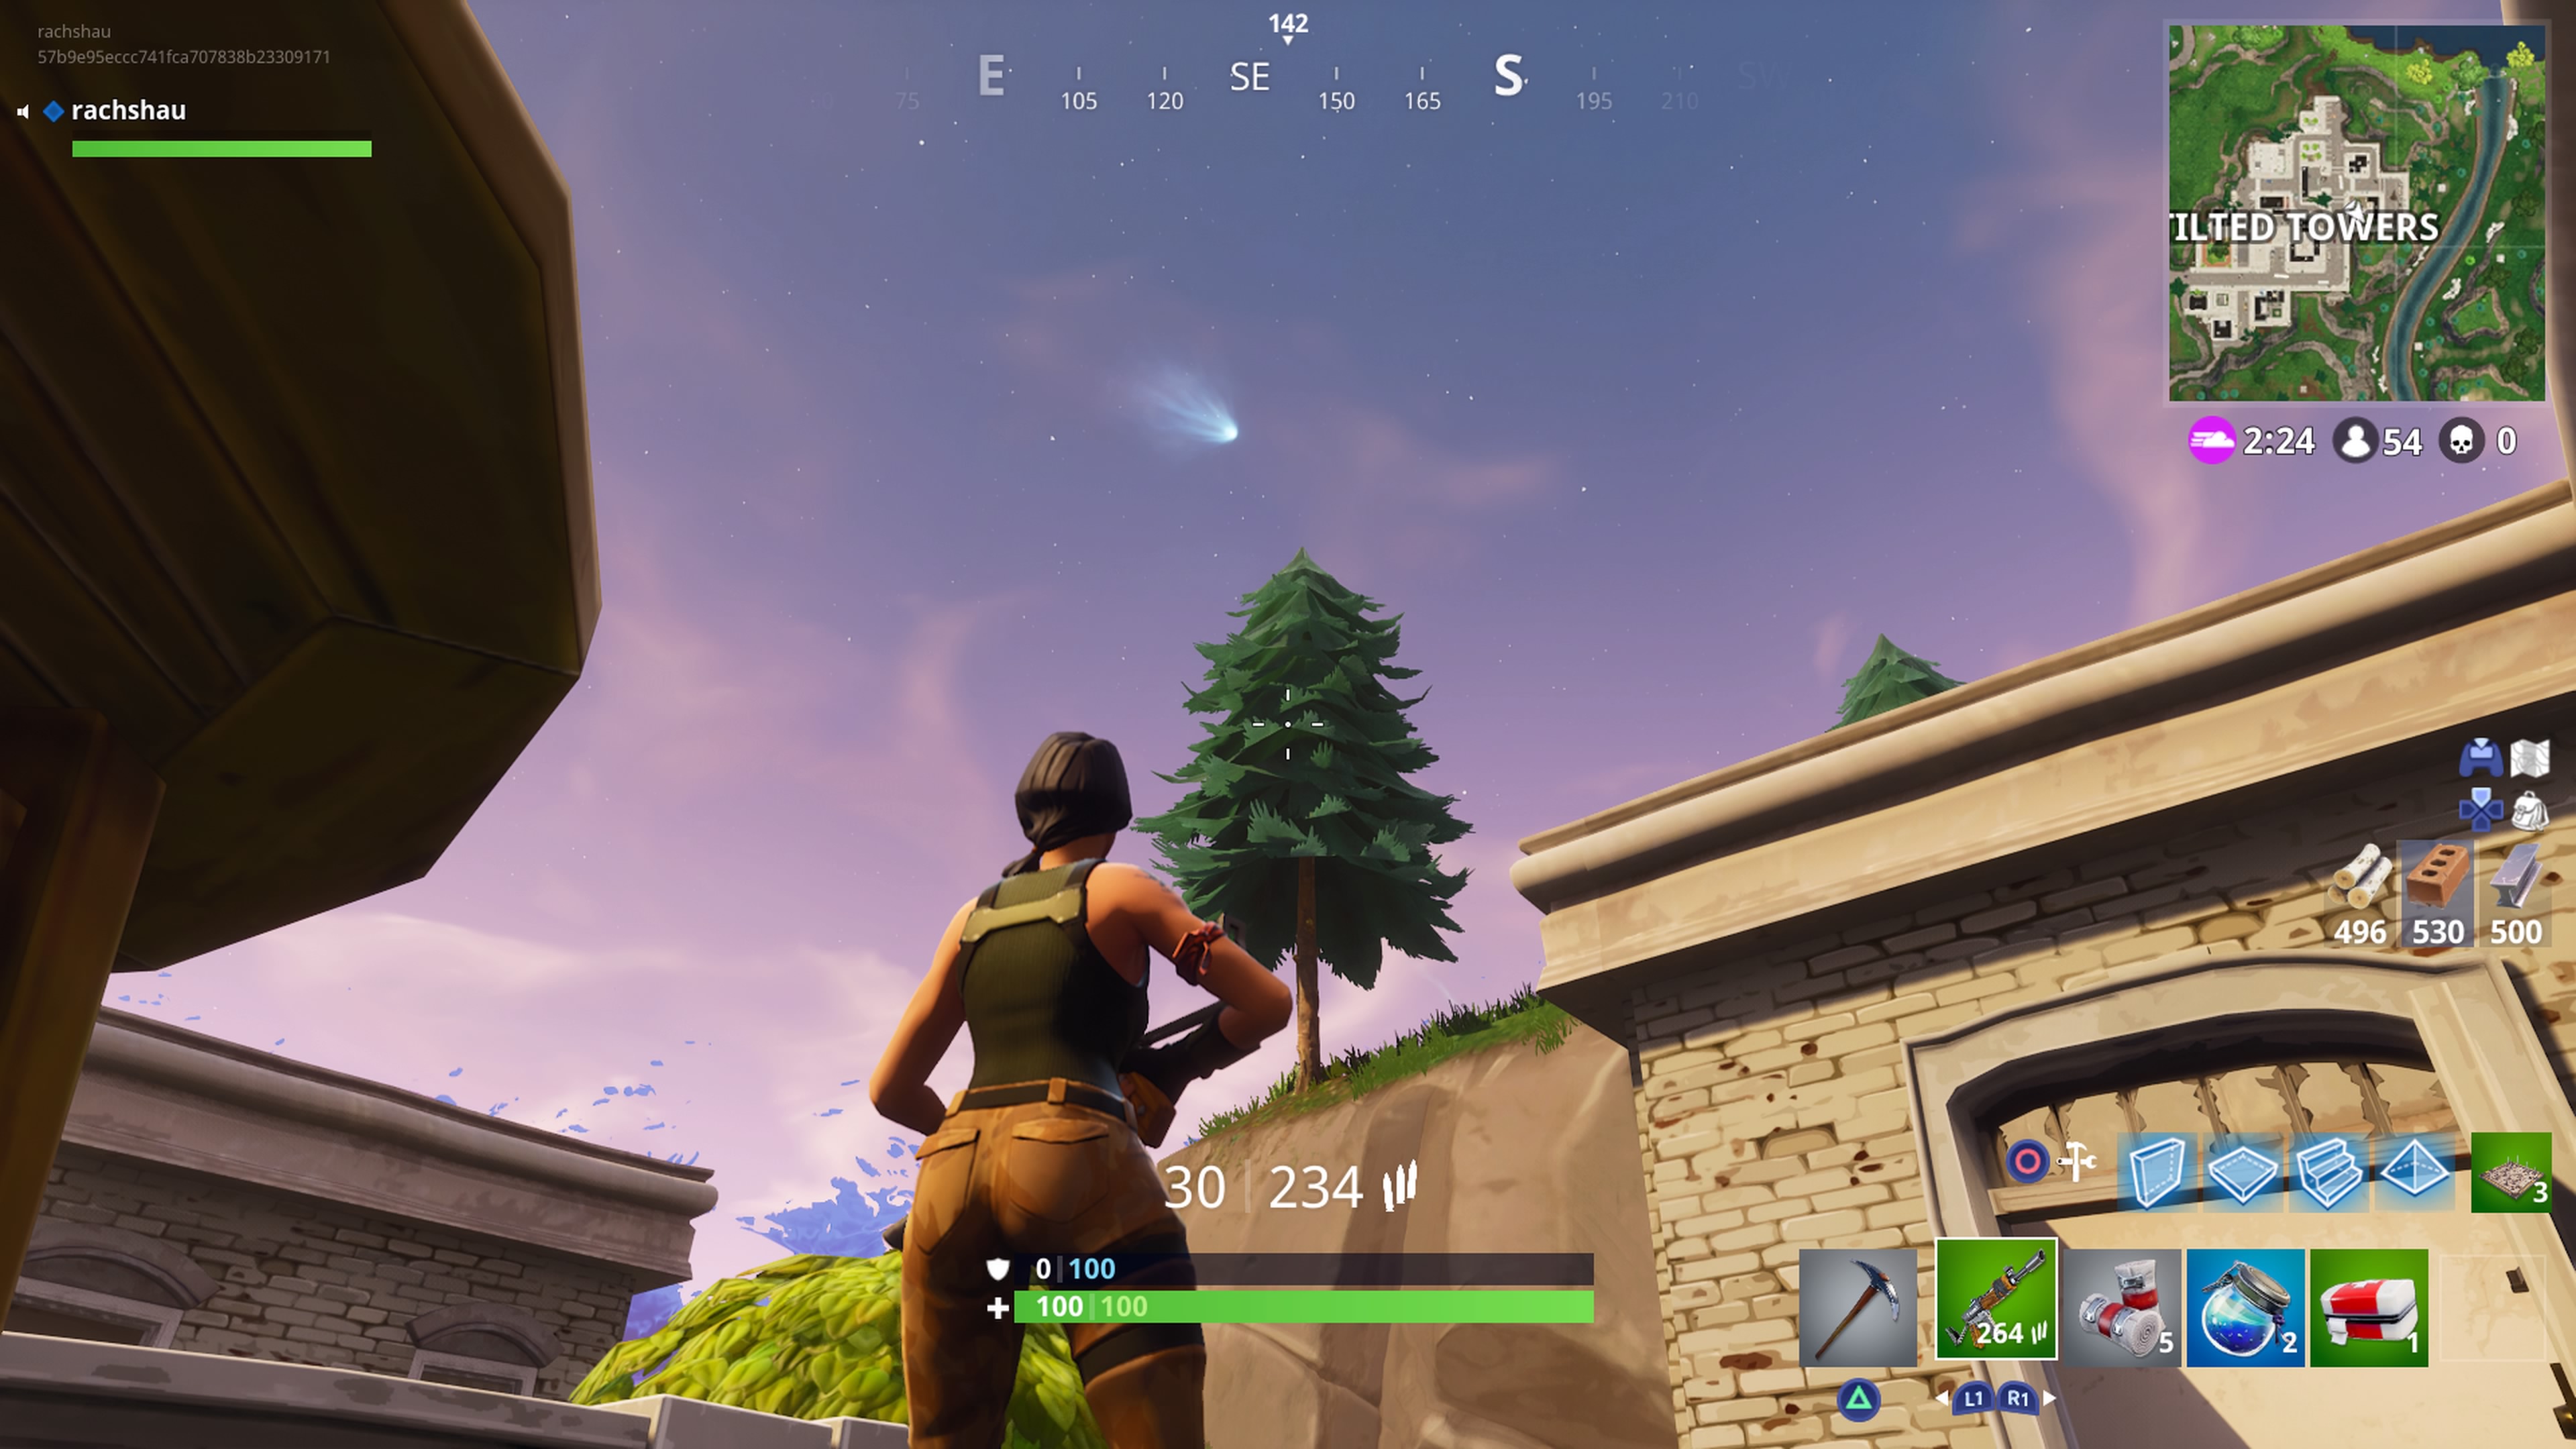 Fortnite Players Believe A Comet Is Set To Destroy Tilted Towers - fortnite players believe a comet is set to destroy tilted towers pc gamer